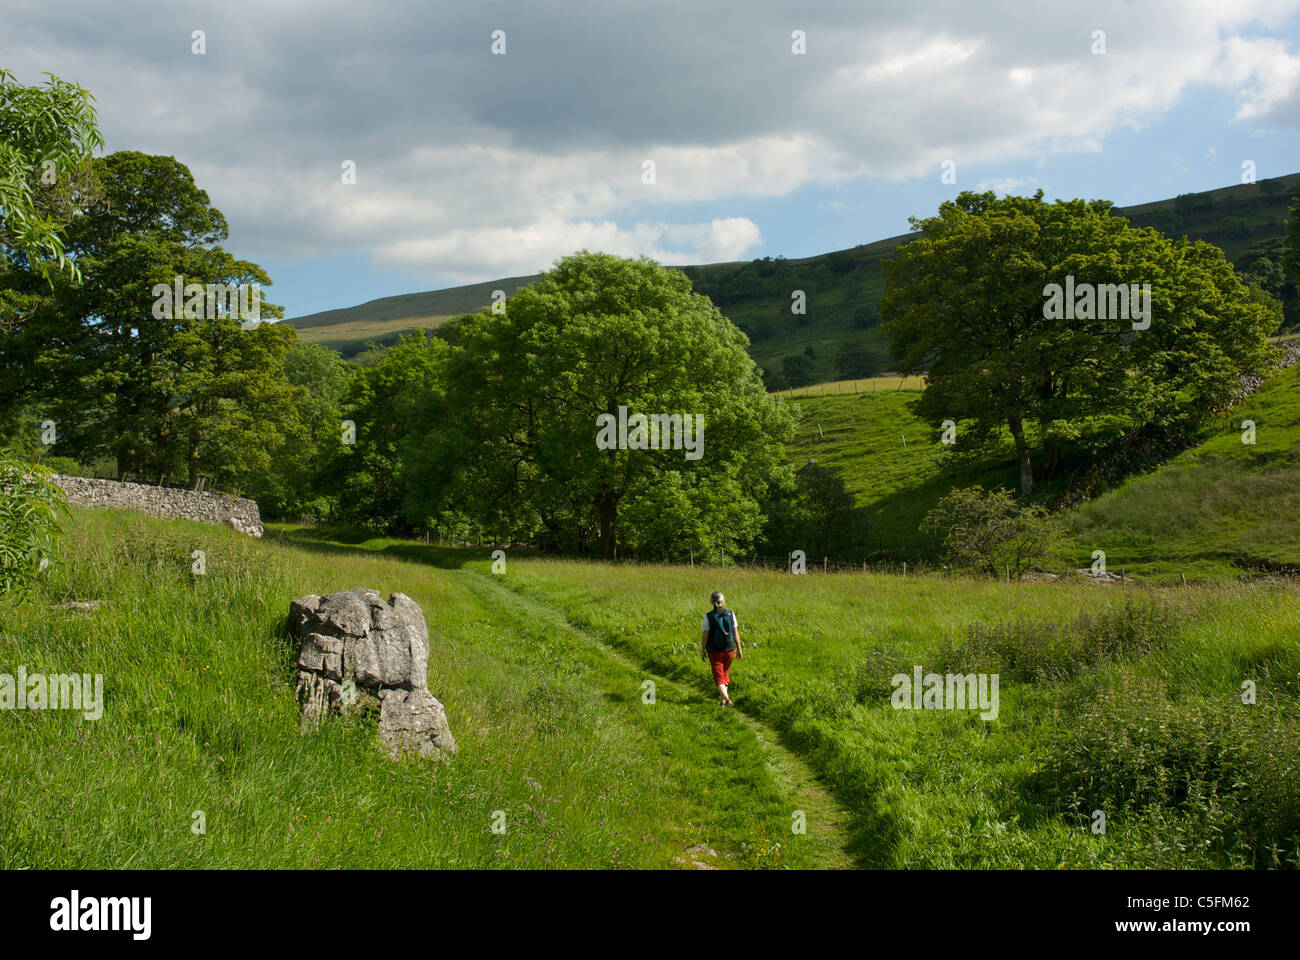 Female walker on path near Hubberholme on Dales Way in Upper Wharfedale, Yorkshire Dales National Park, England UK Stock Photo